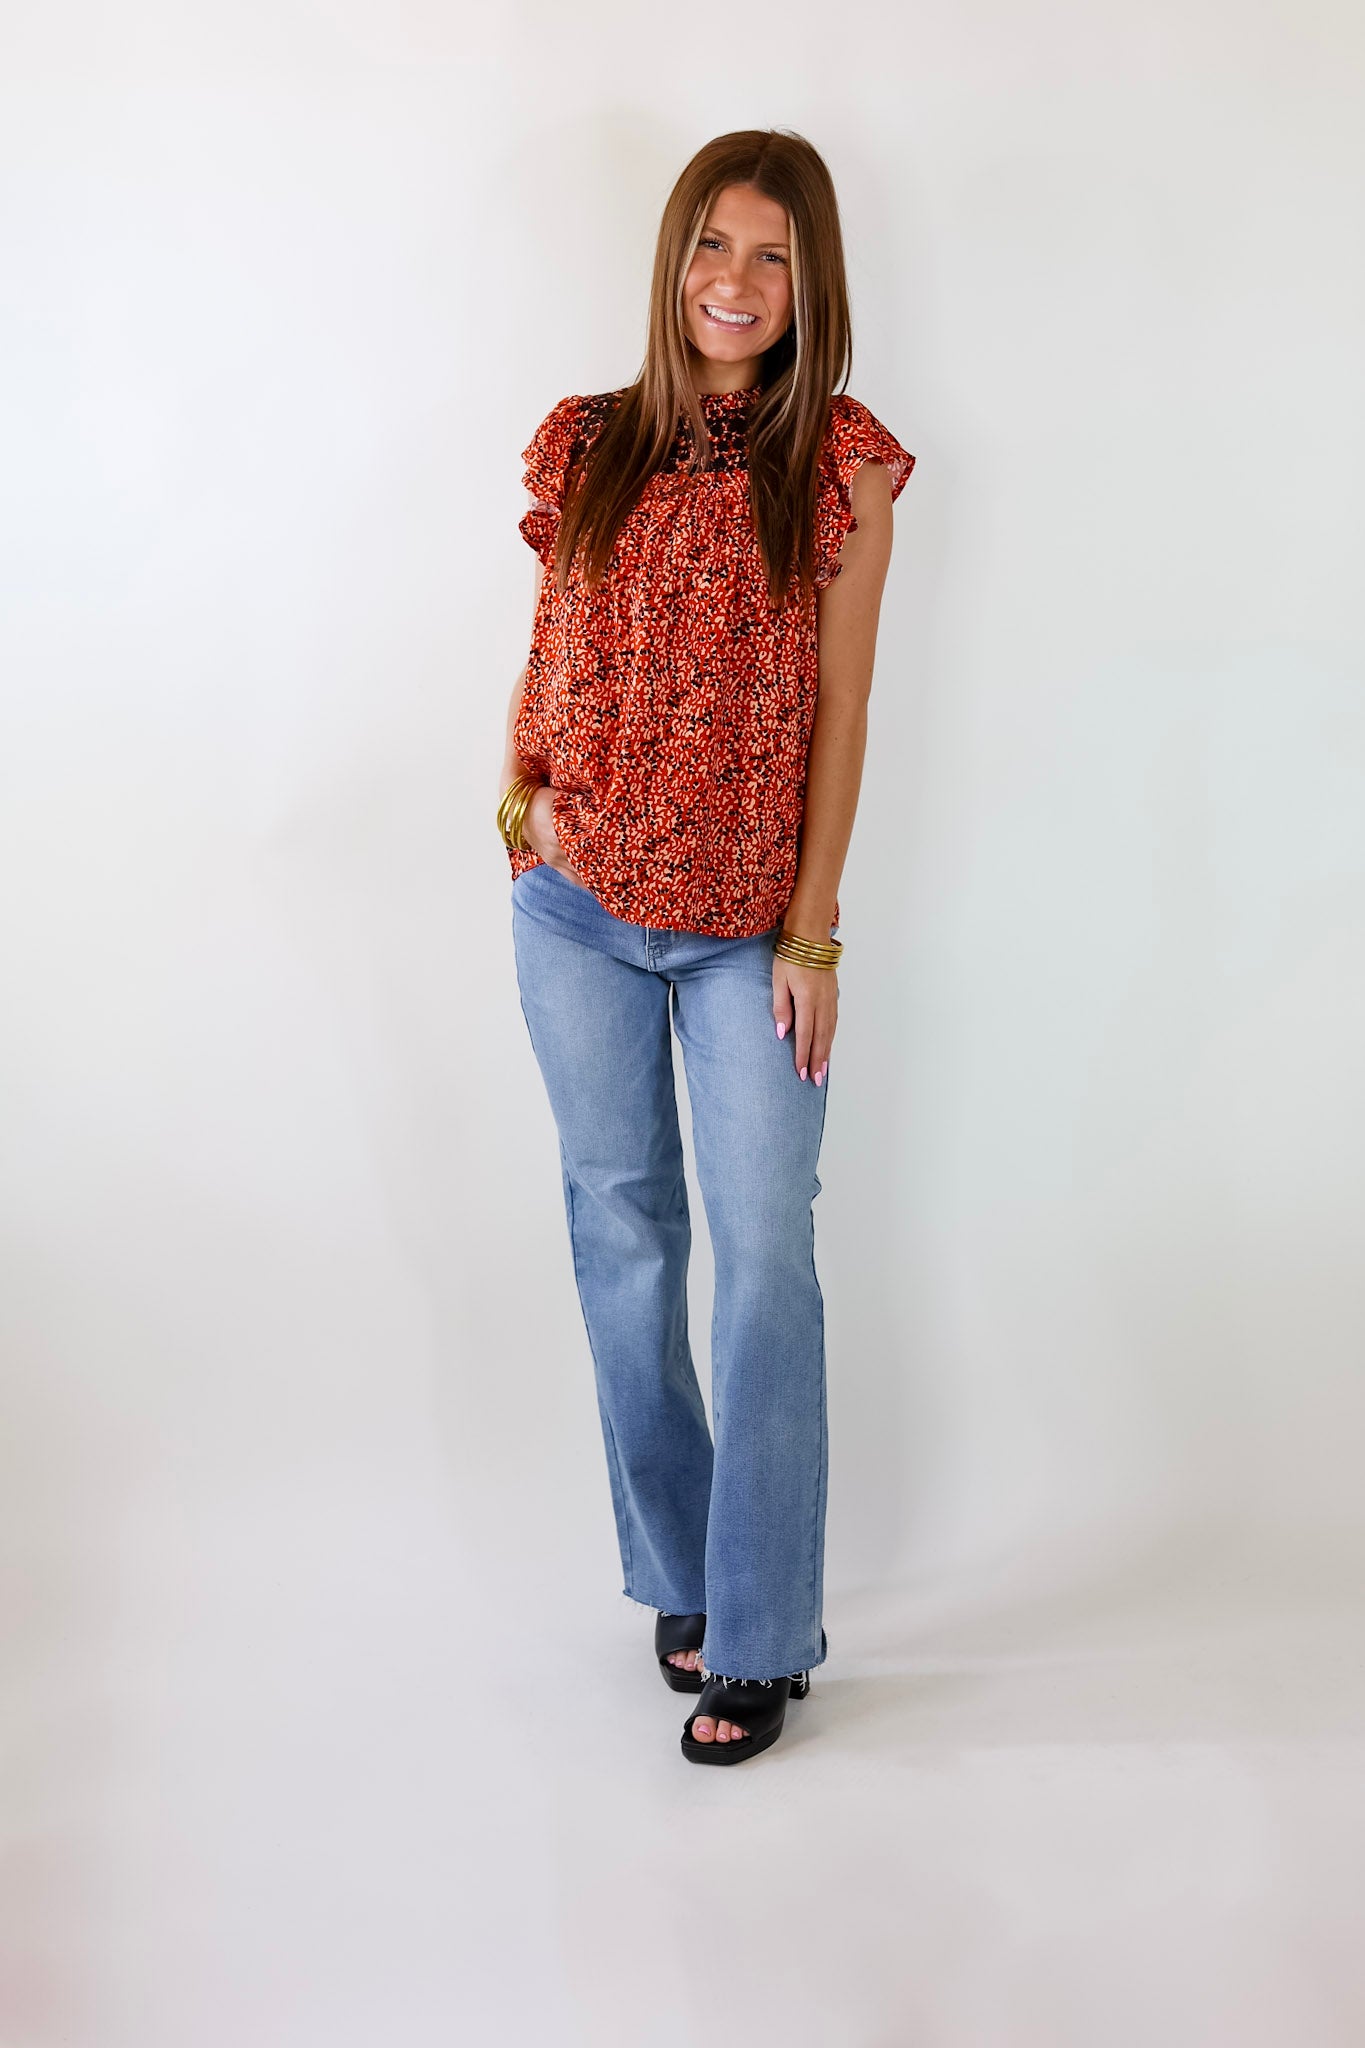 Overlook Hotel Floral Embroidered Top in Red - Giddy Up Glamour Boutique